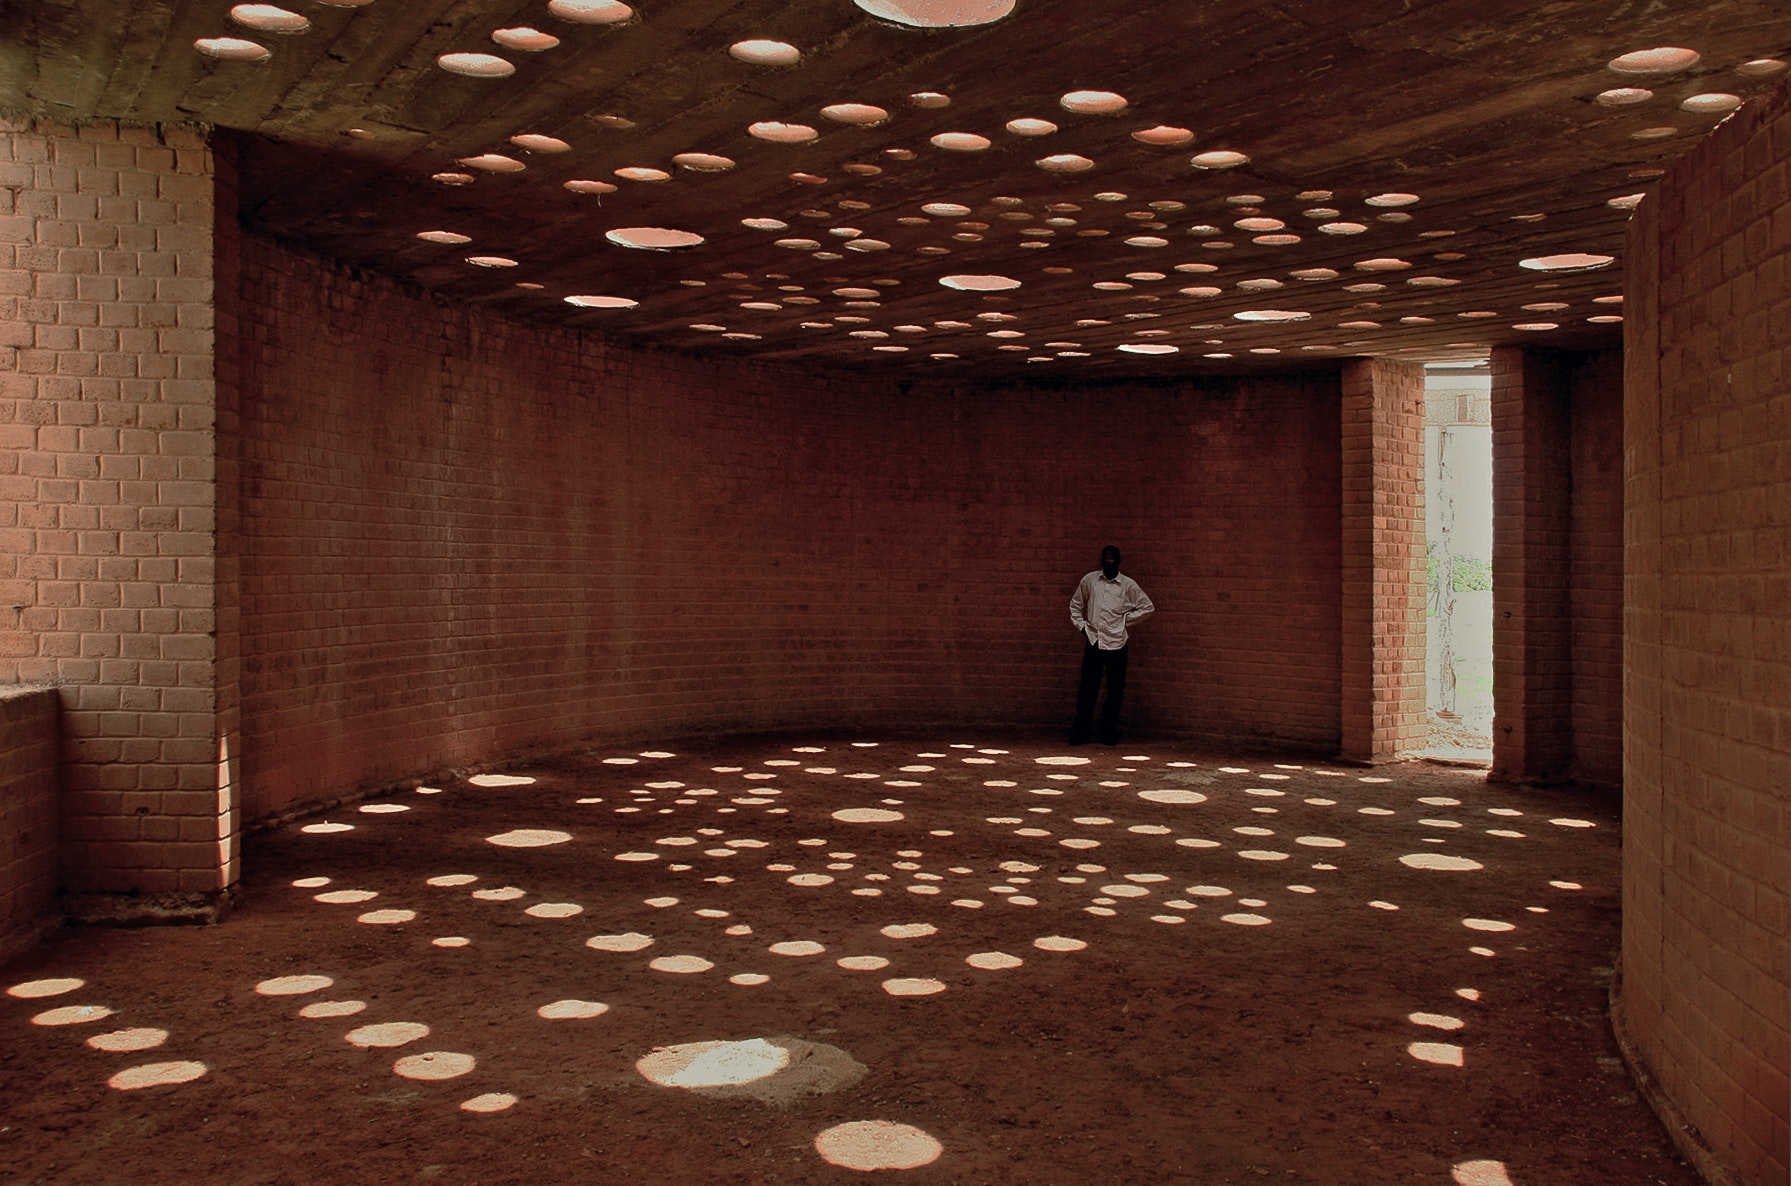 round room with brown walls and circular patterns cut into ceiling allowing sunlight in